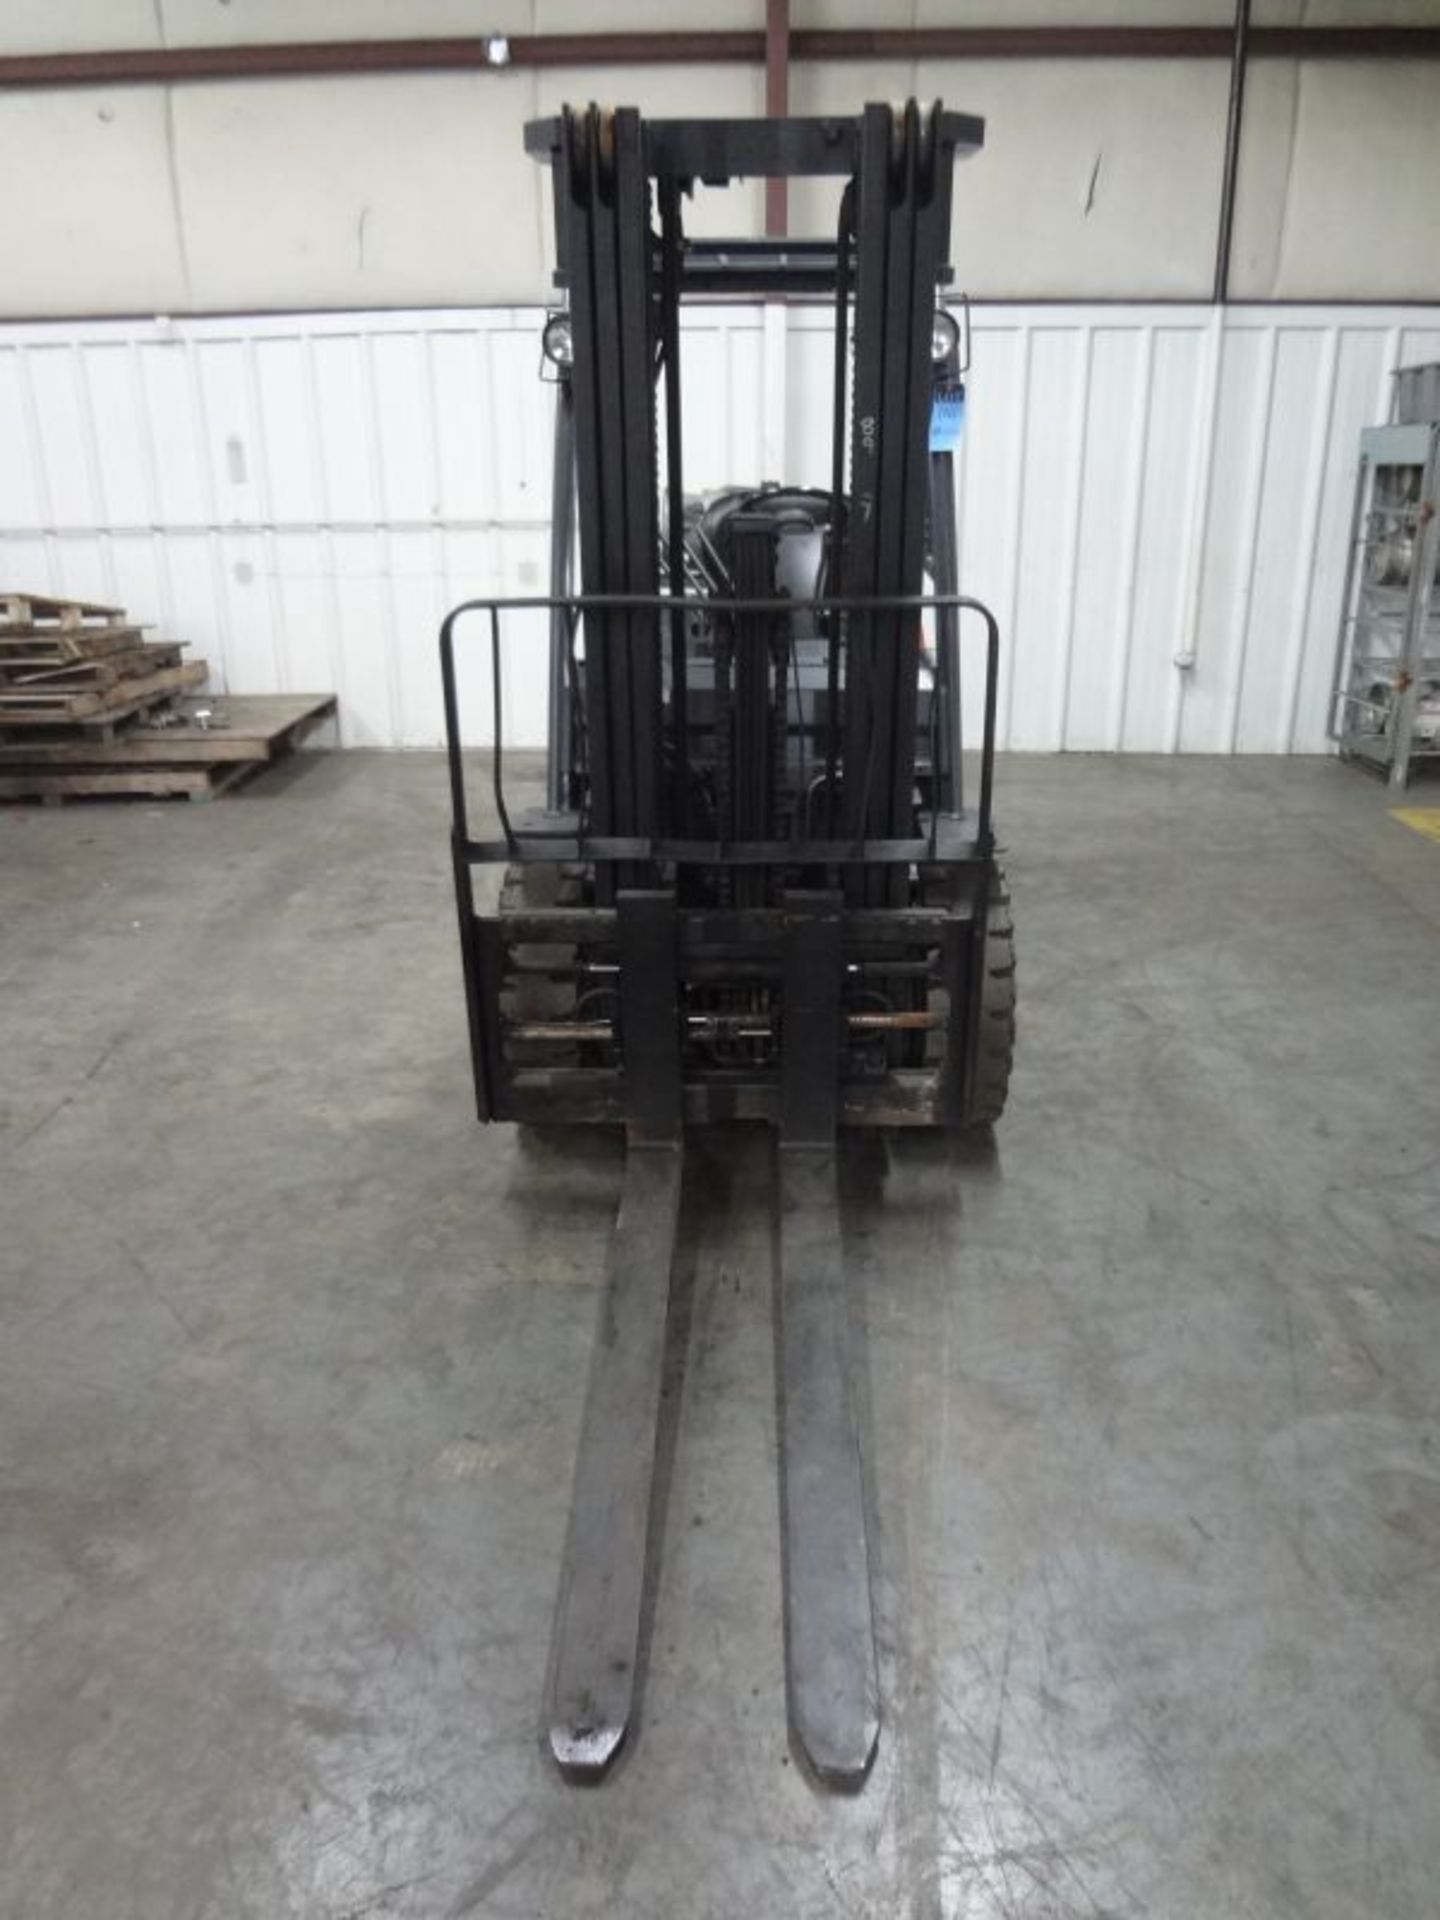 6,000 LB. TOYOTA MODEL 8FGU30 PNEUMATIC TIRE LP GAS LIFT TRUCK; S/N 31605, 15,734 HOURS SHOWING, 3- - Image 5 of 8